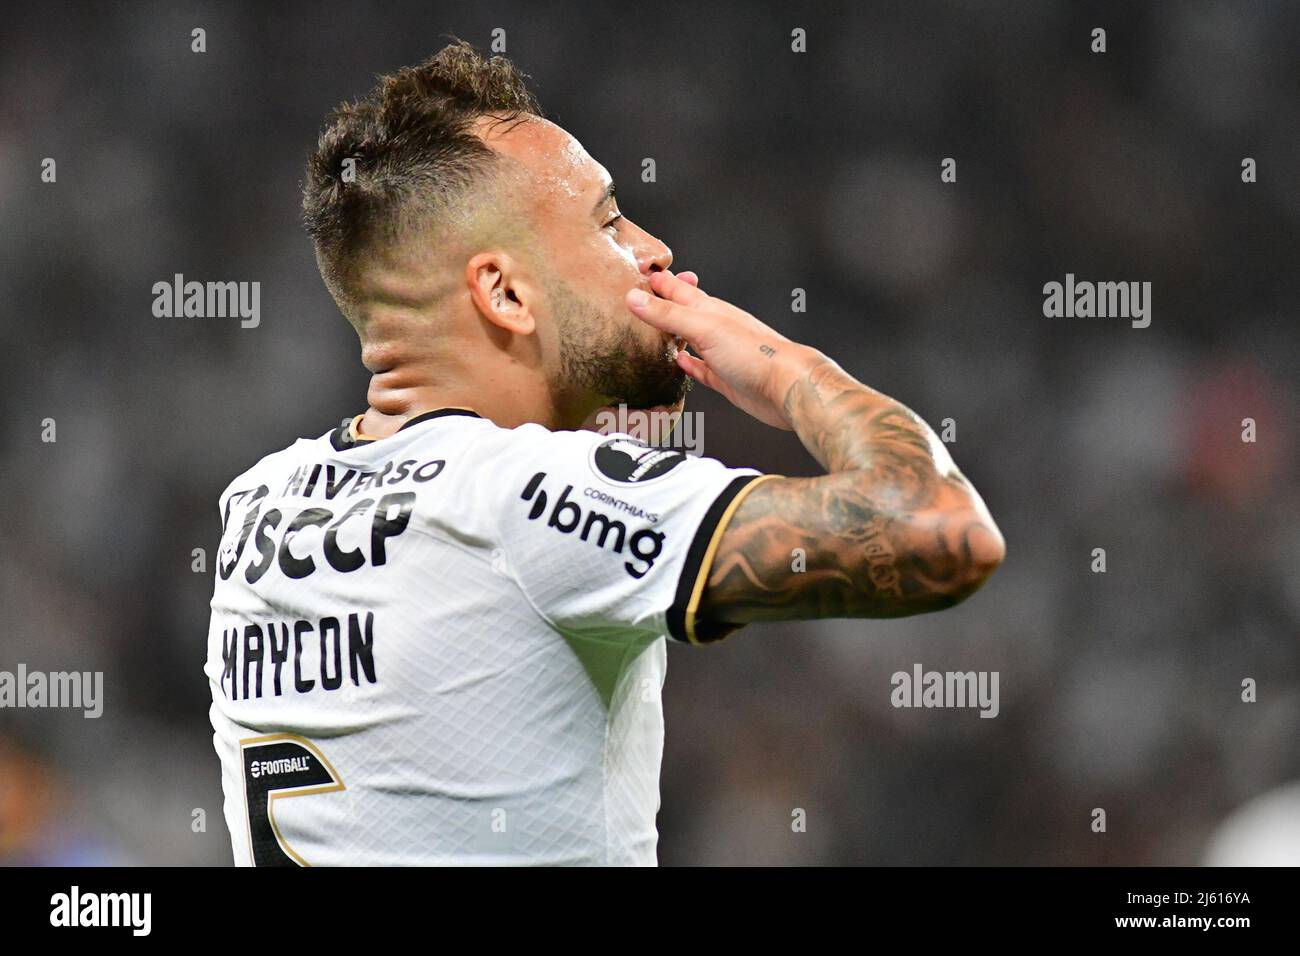 SÃO PAULO, BRASIL - APRIL 26: Maycon of S.C. Corinthians celebrates after scoring a goal  during Copa CONMEBOL Libertadores match between S.C. Corinthians and Boca Juniors at Arena Corinthians on April 26, 2022 in São Paulo, Brazil. (Photo by Leandro Bernardes/PxImages) Credit: Px Images/Alamy Live News Stock Photo